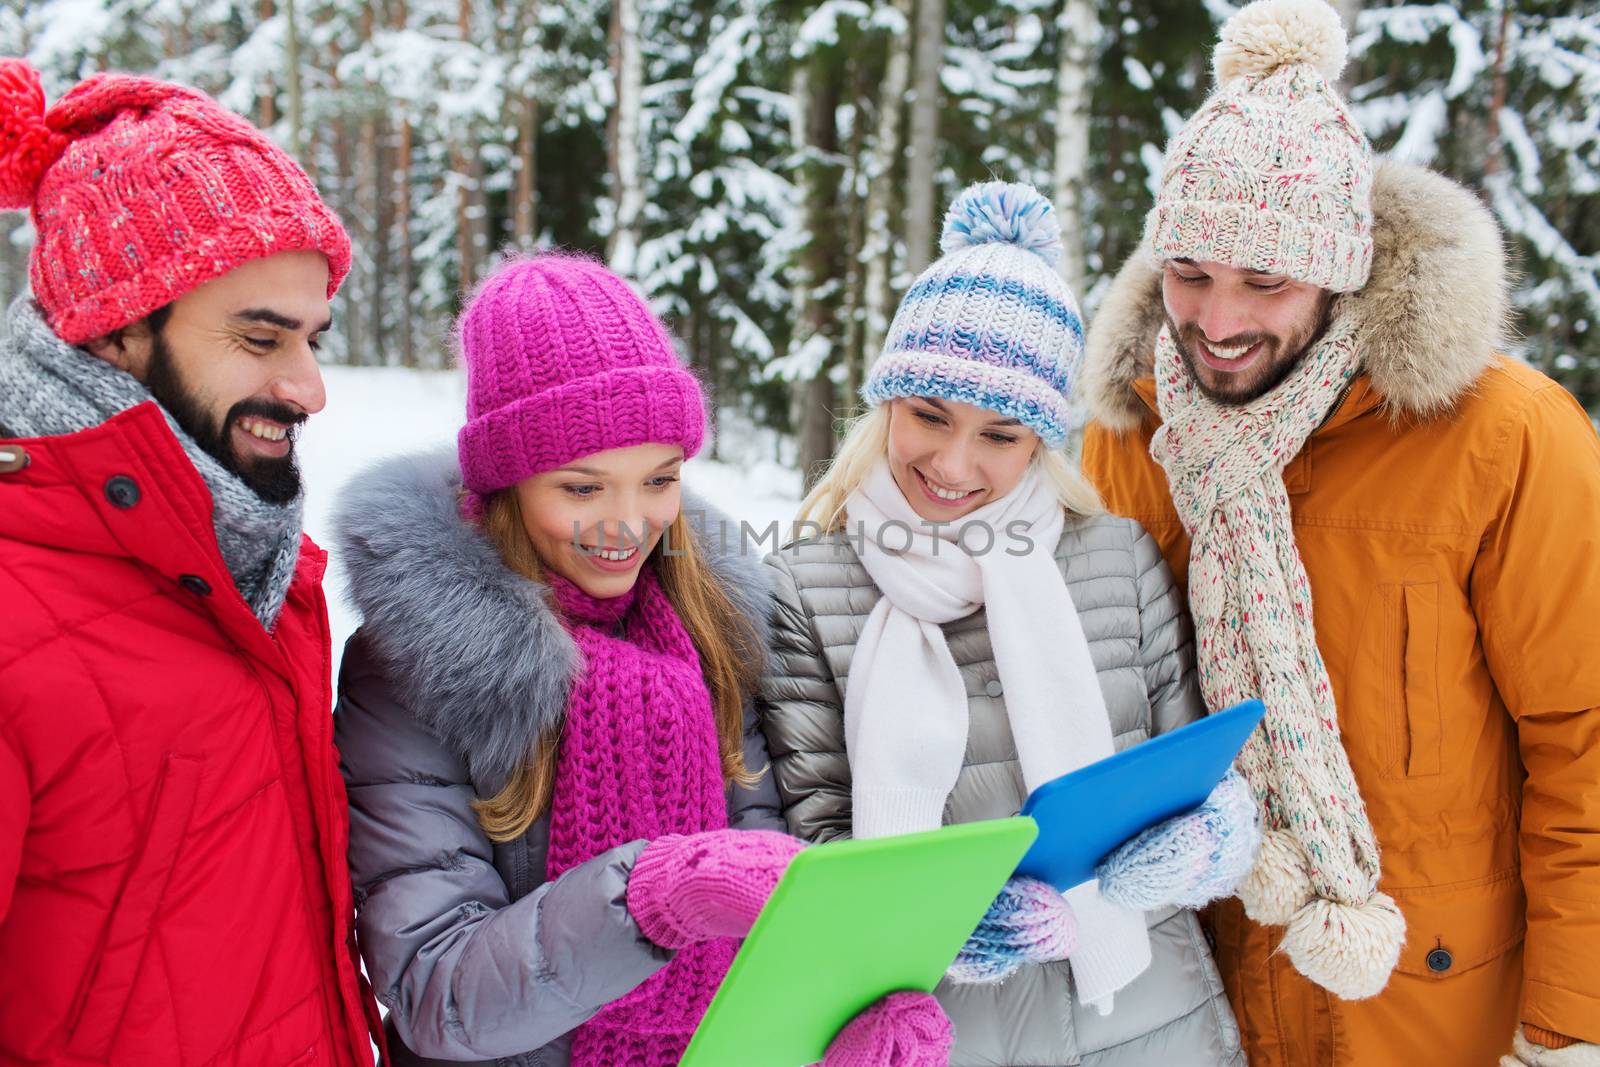 technology, season, friendship and people concept - group of smiling men and women with tablet pc computers in winter forest